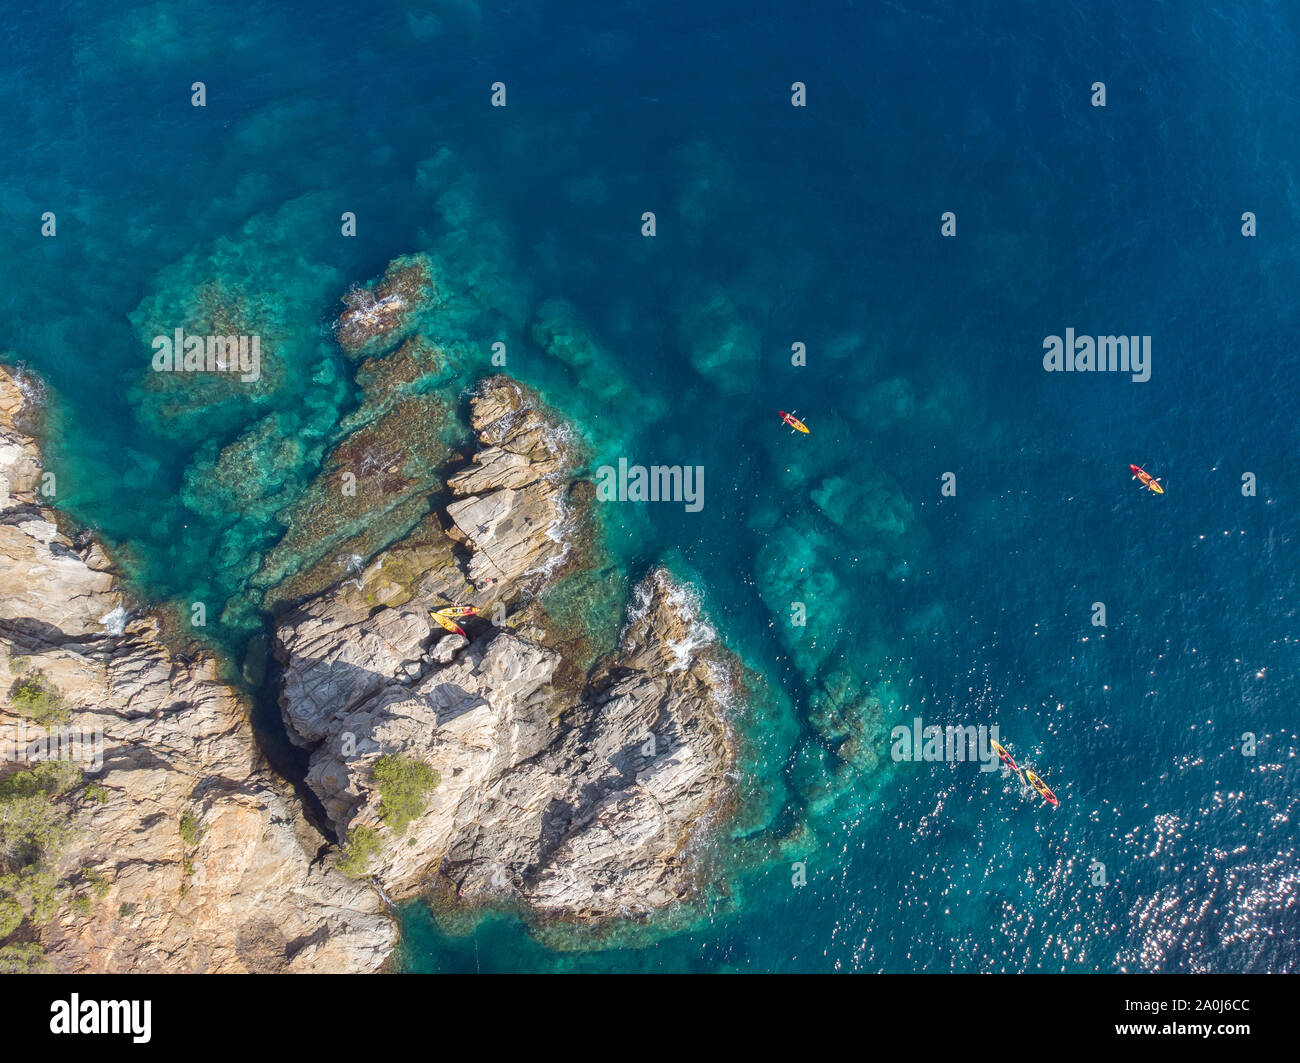 A cluster of kayaks gather off a rocky cove in the Mediterranean Stock Photo